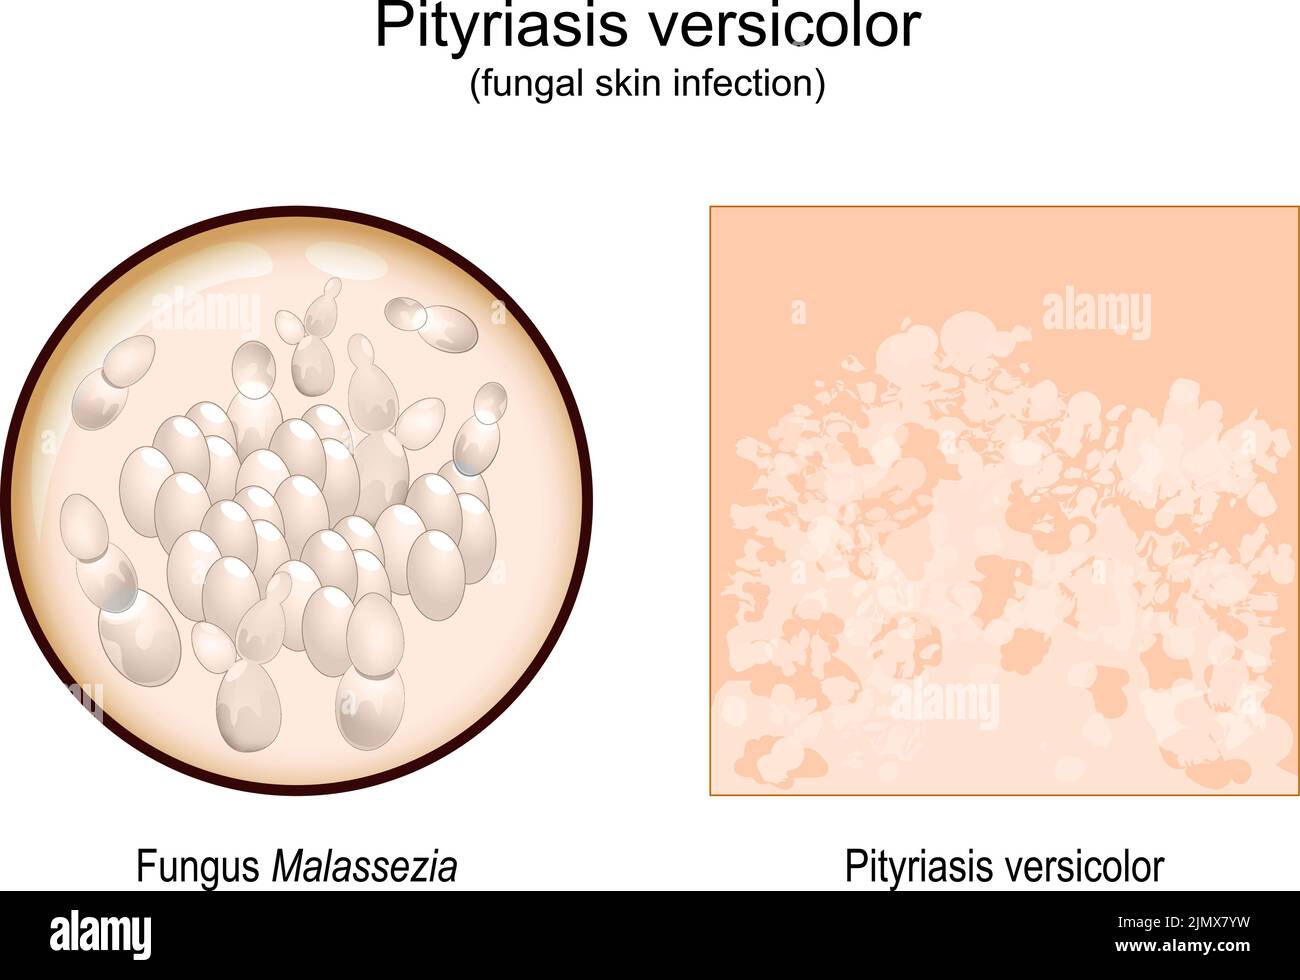 pityriasis versicolor. skin surface with Signs and symptoms of Tinea versicolor. Close-up of a Malassezia fungi that caused skin eruption. vector Stock Vector